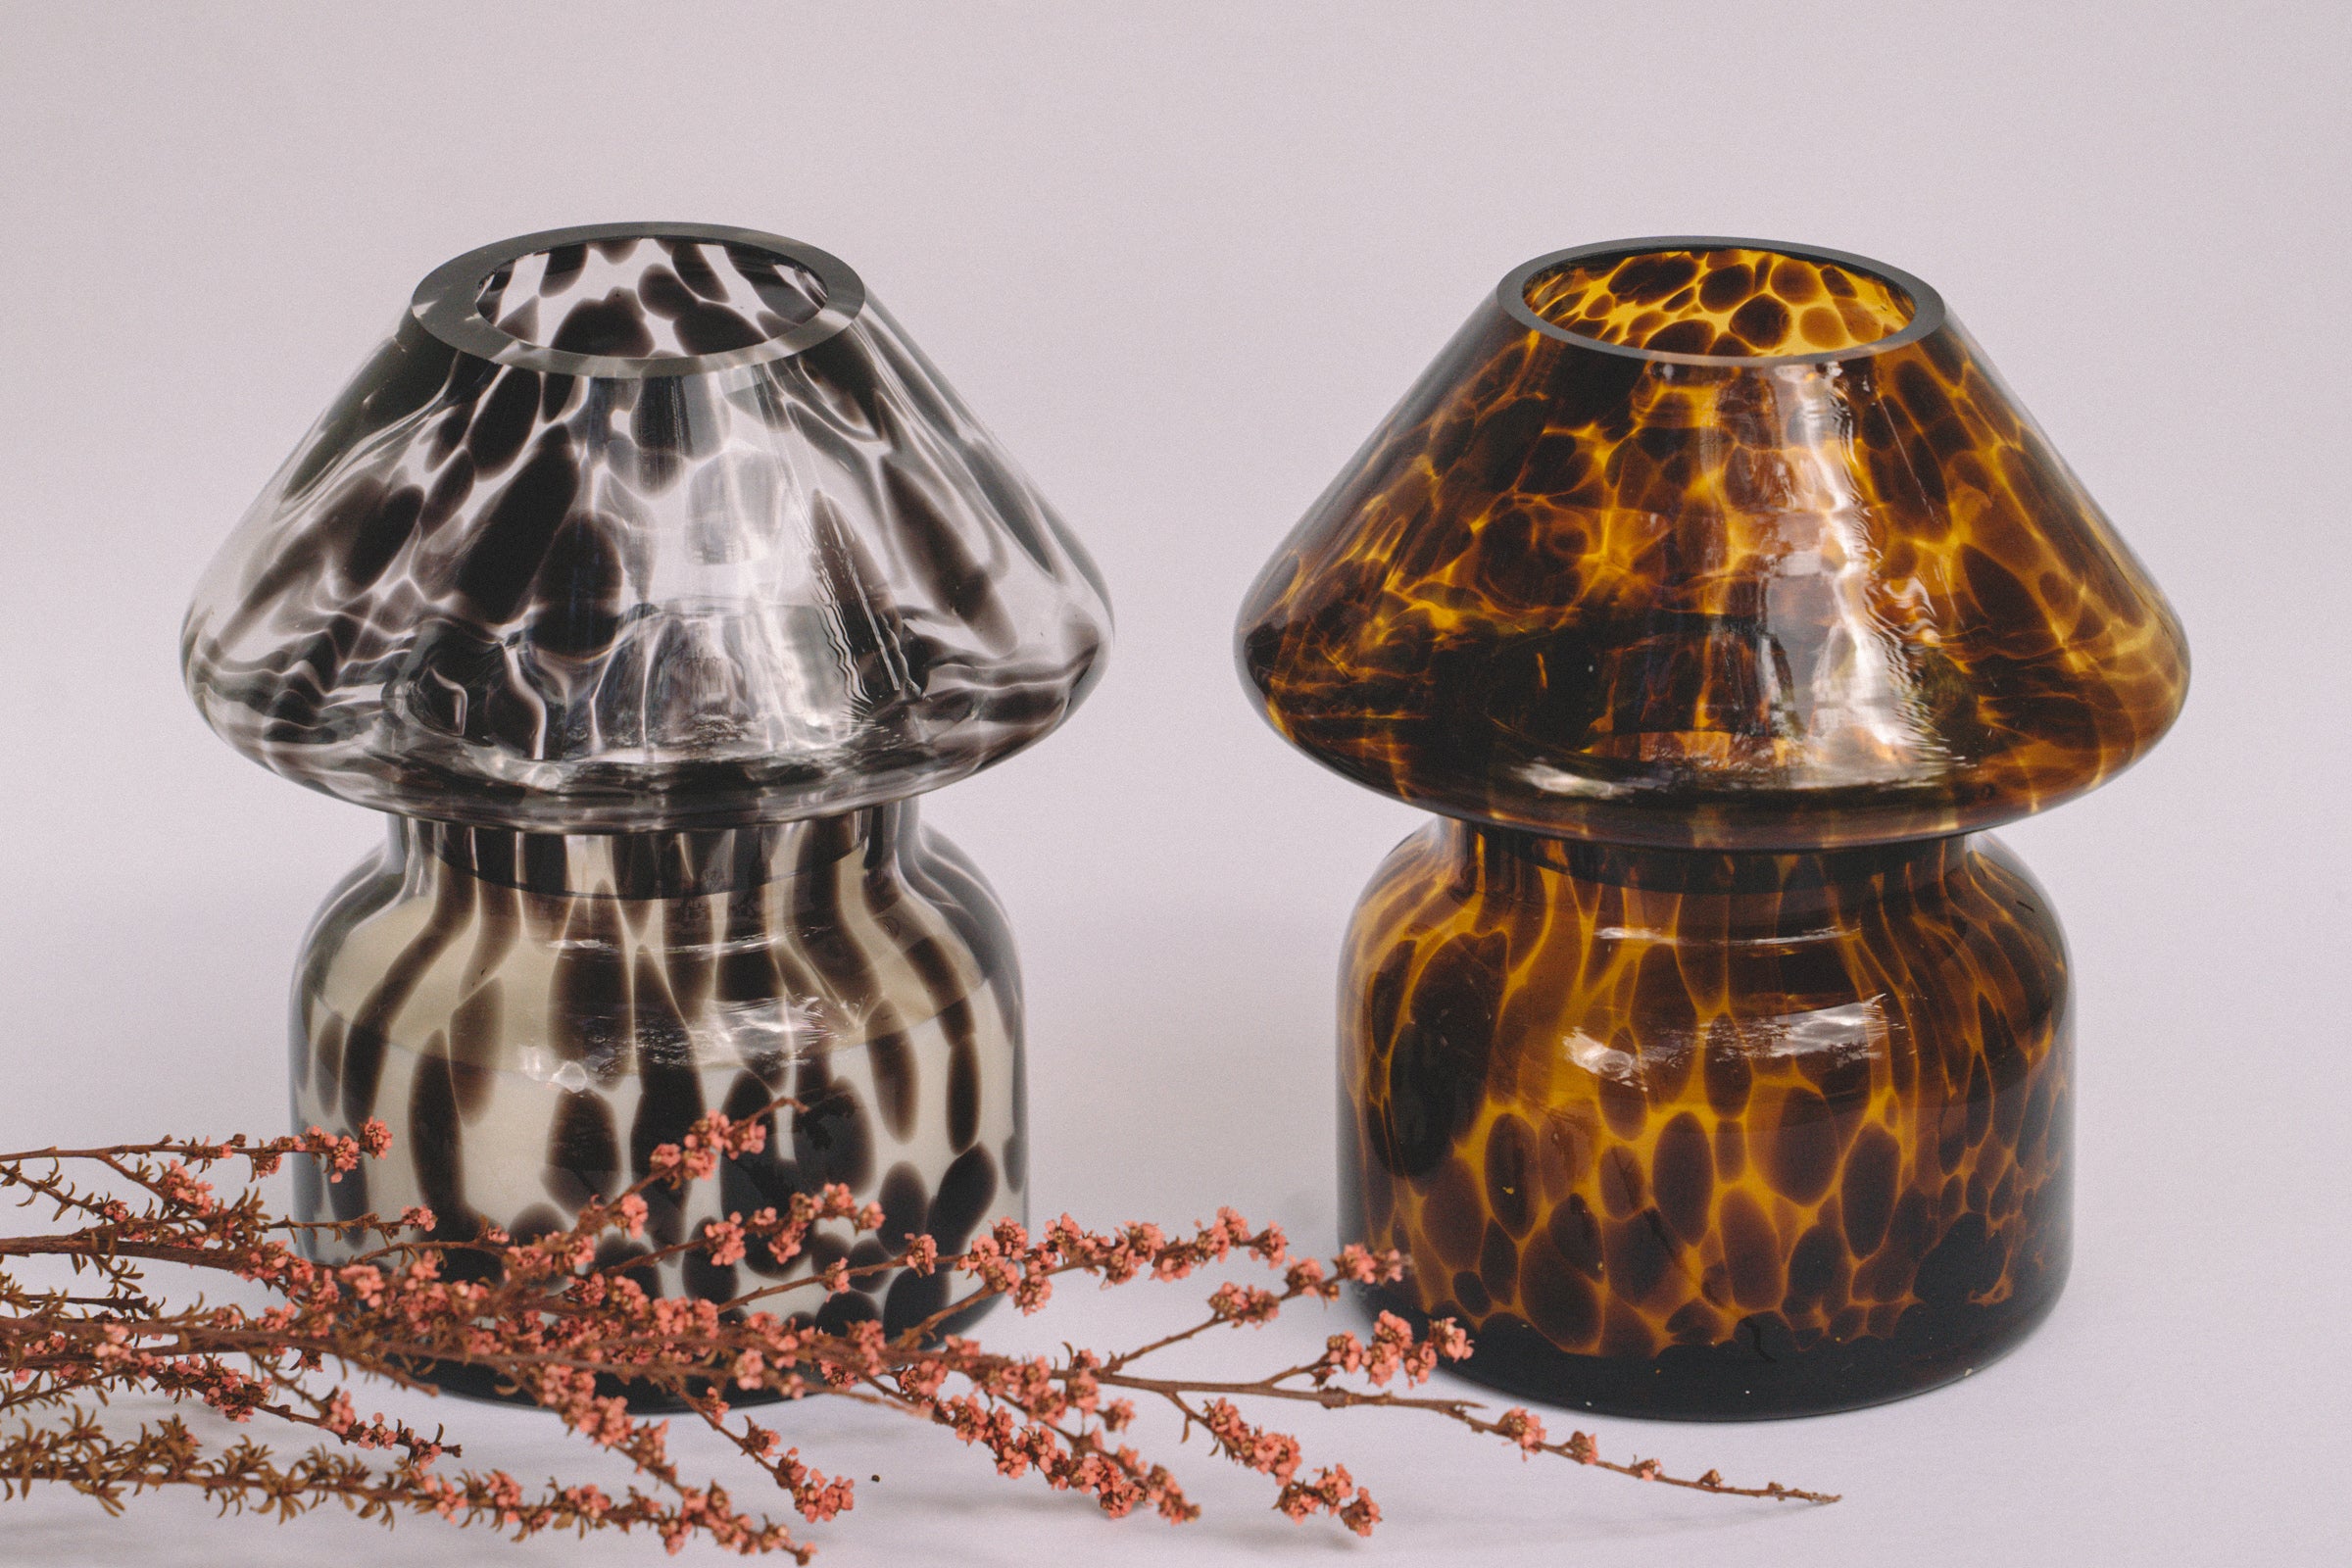 Mushroom candle lamp with black spots on clear glass next to leopard print candle lamp. Filled with 100% soy wax with dried flowers.